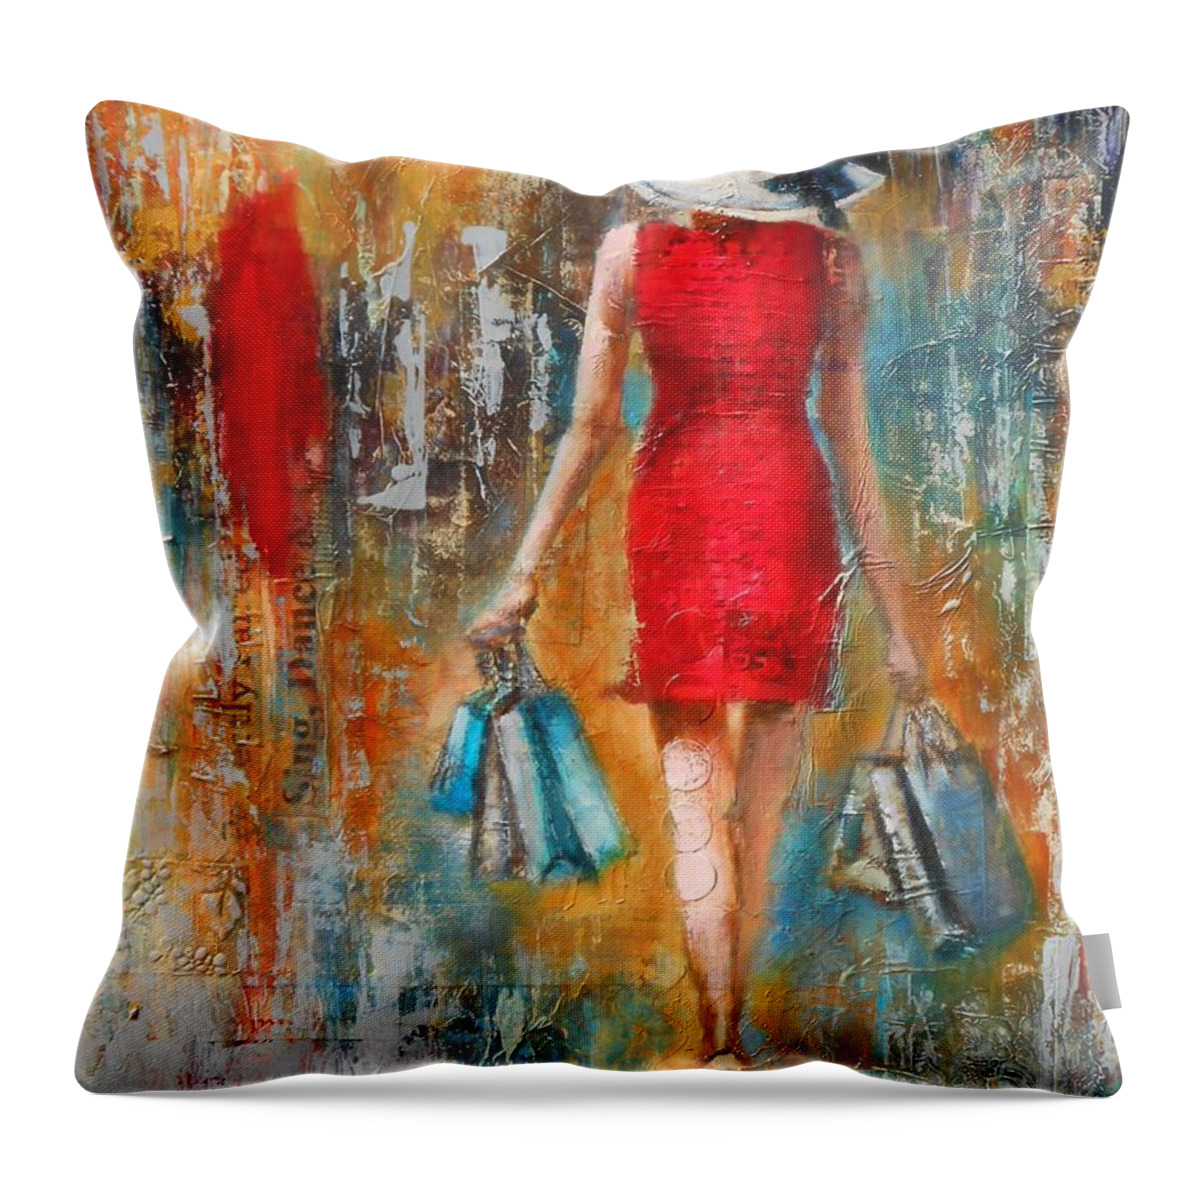 Lady Throw Pillow featuring the painting Abstract Lady 6 by Susan Goh